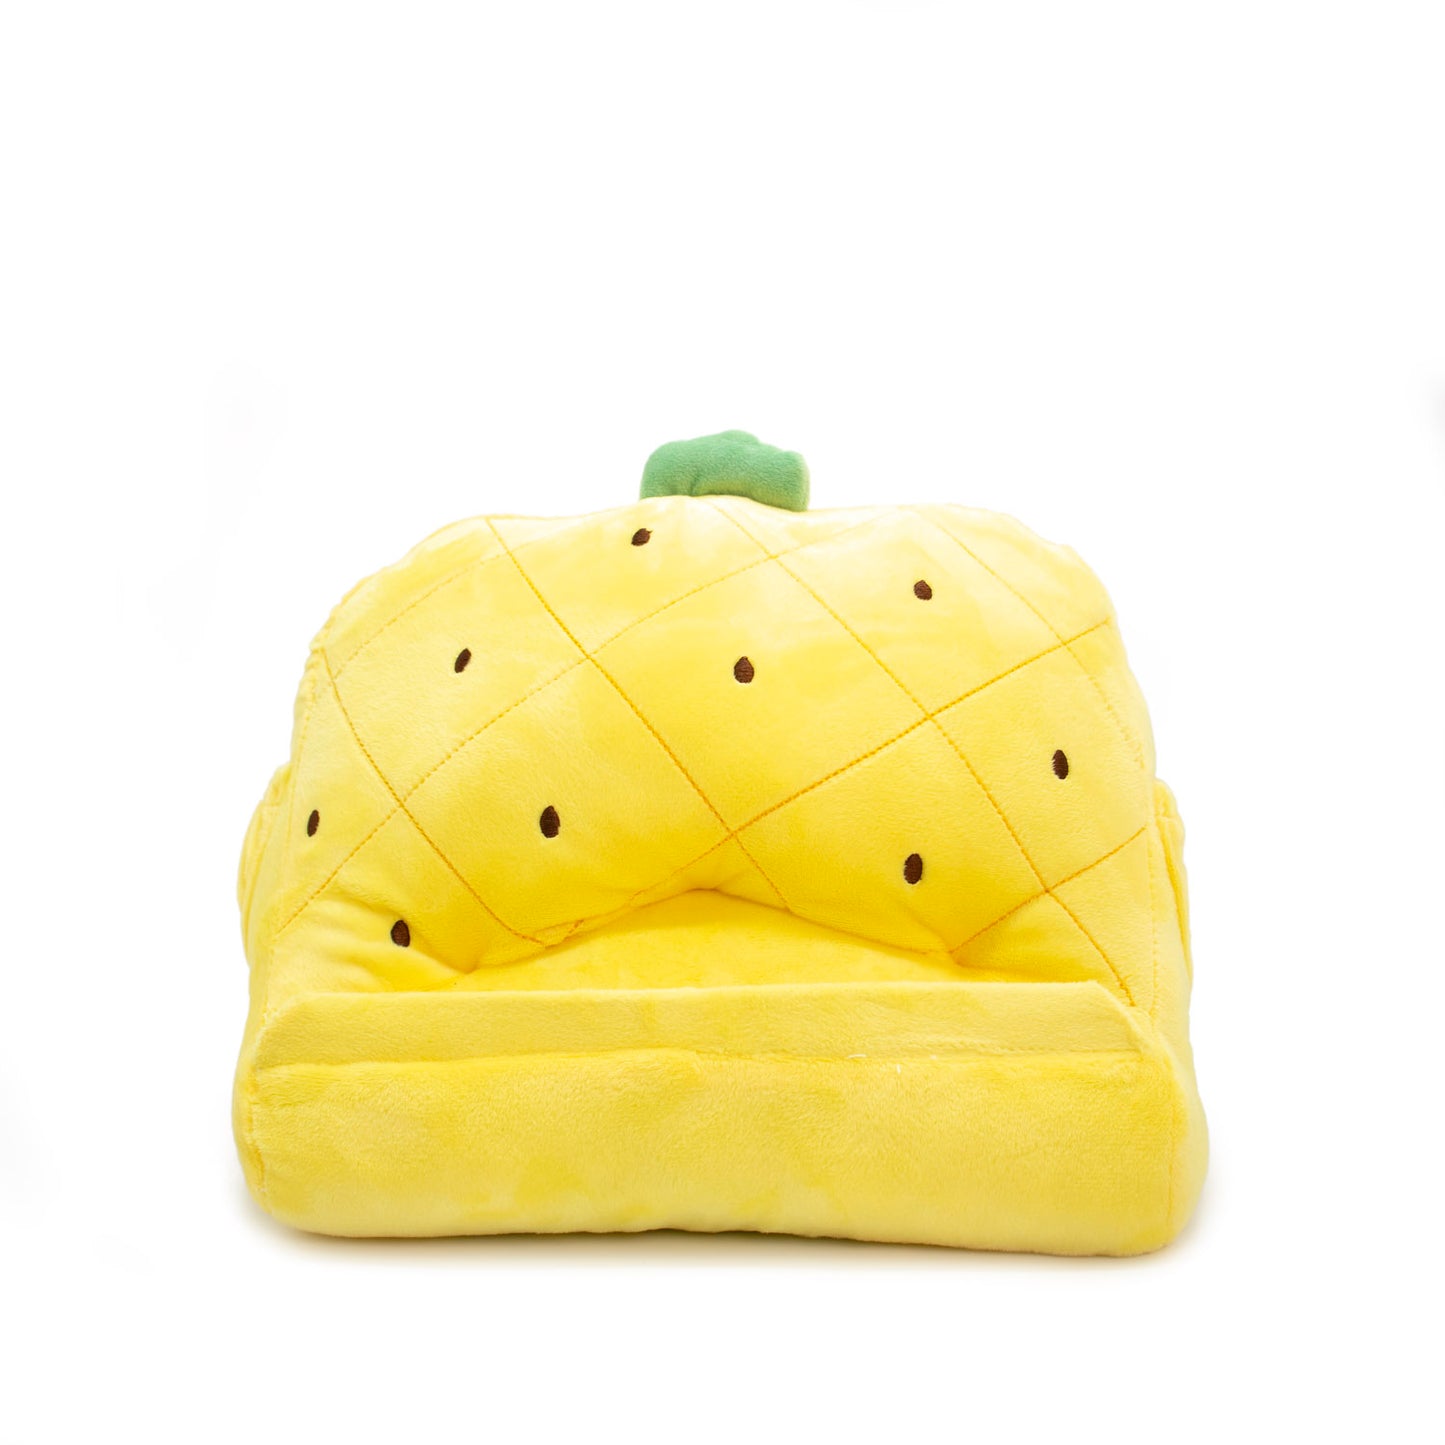 Tablet Device Stand - Pineapple